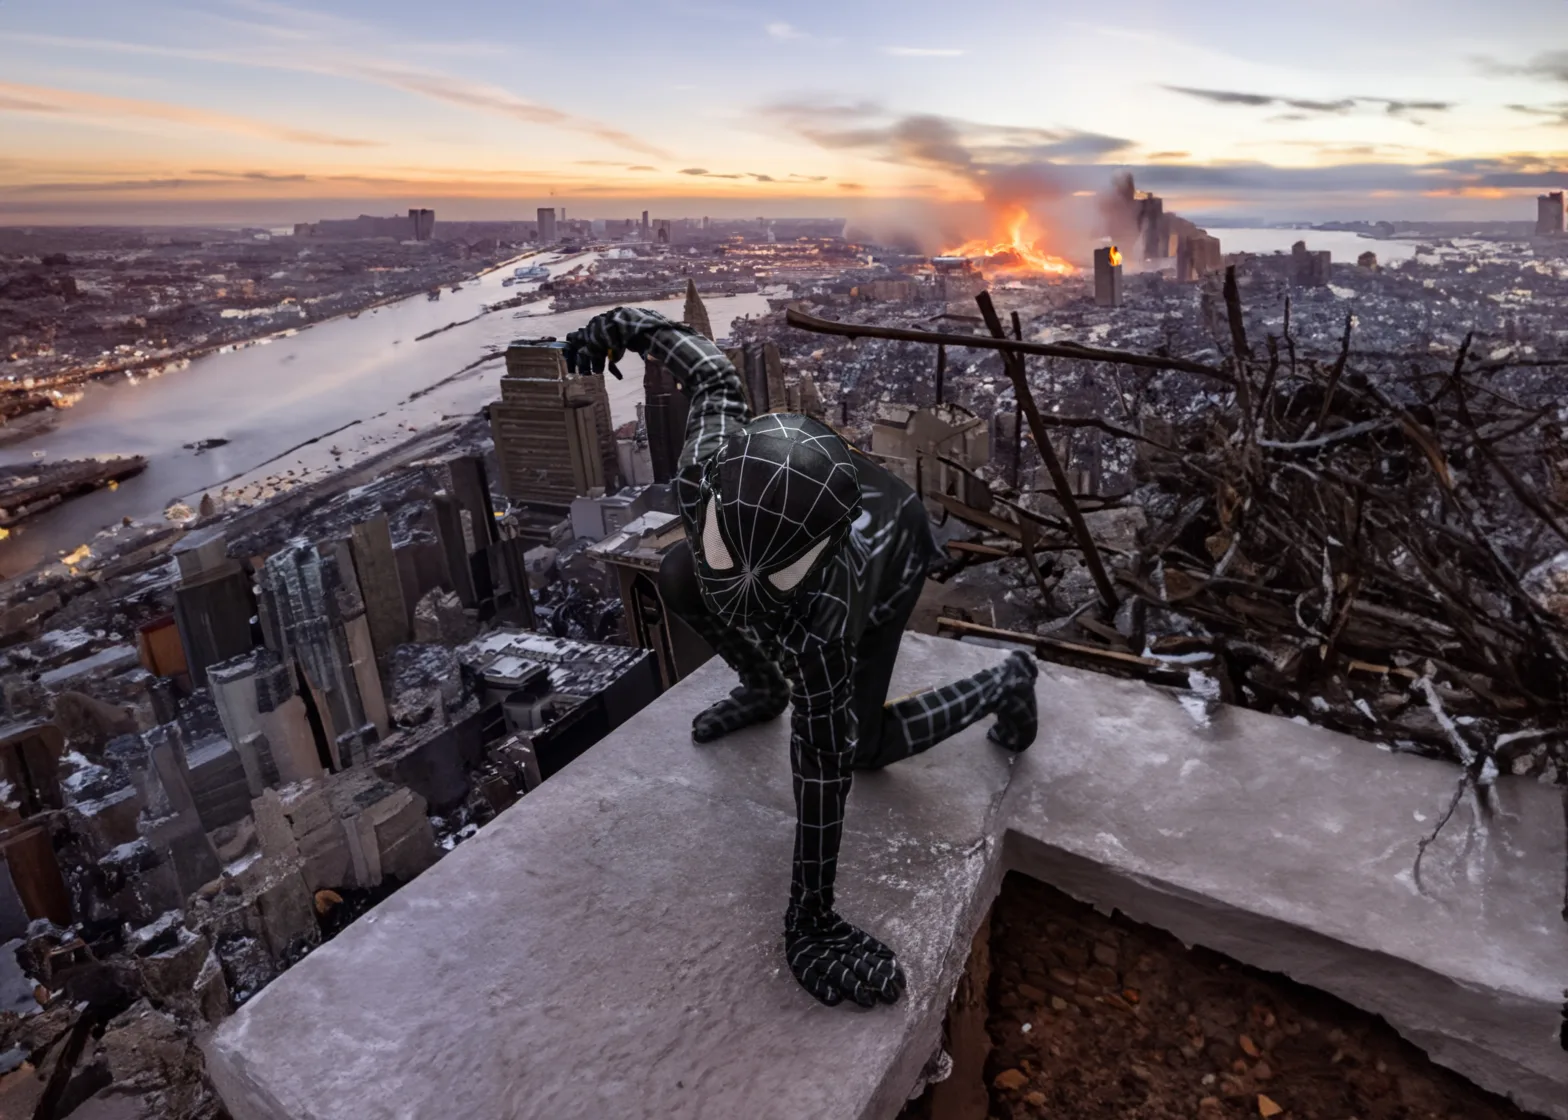 My Son Dressed Up As Spiderman Edited With Photoshop Generative Art To Appear On A Rooftop In City That Is Being Destroyed